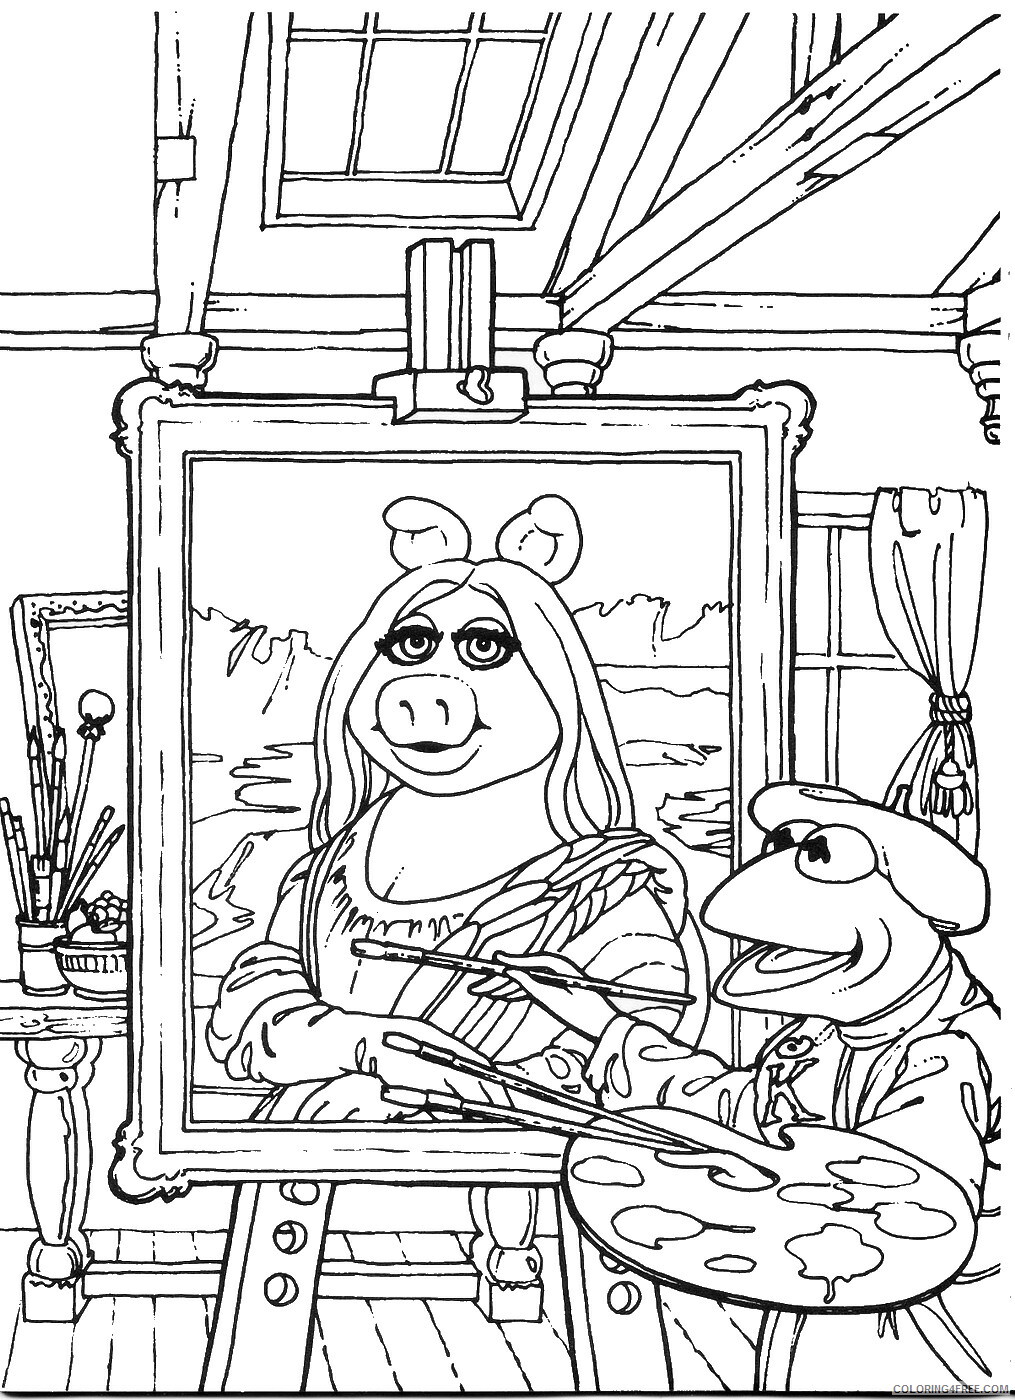 The Muppet Show Coloring Pages TV Film muppets_cl_19 Printable 2020 09378 Coloring4free